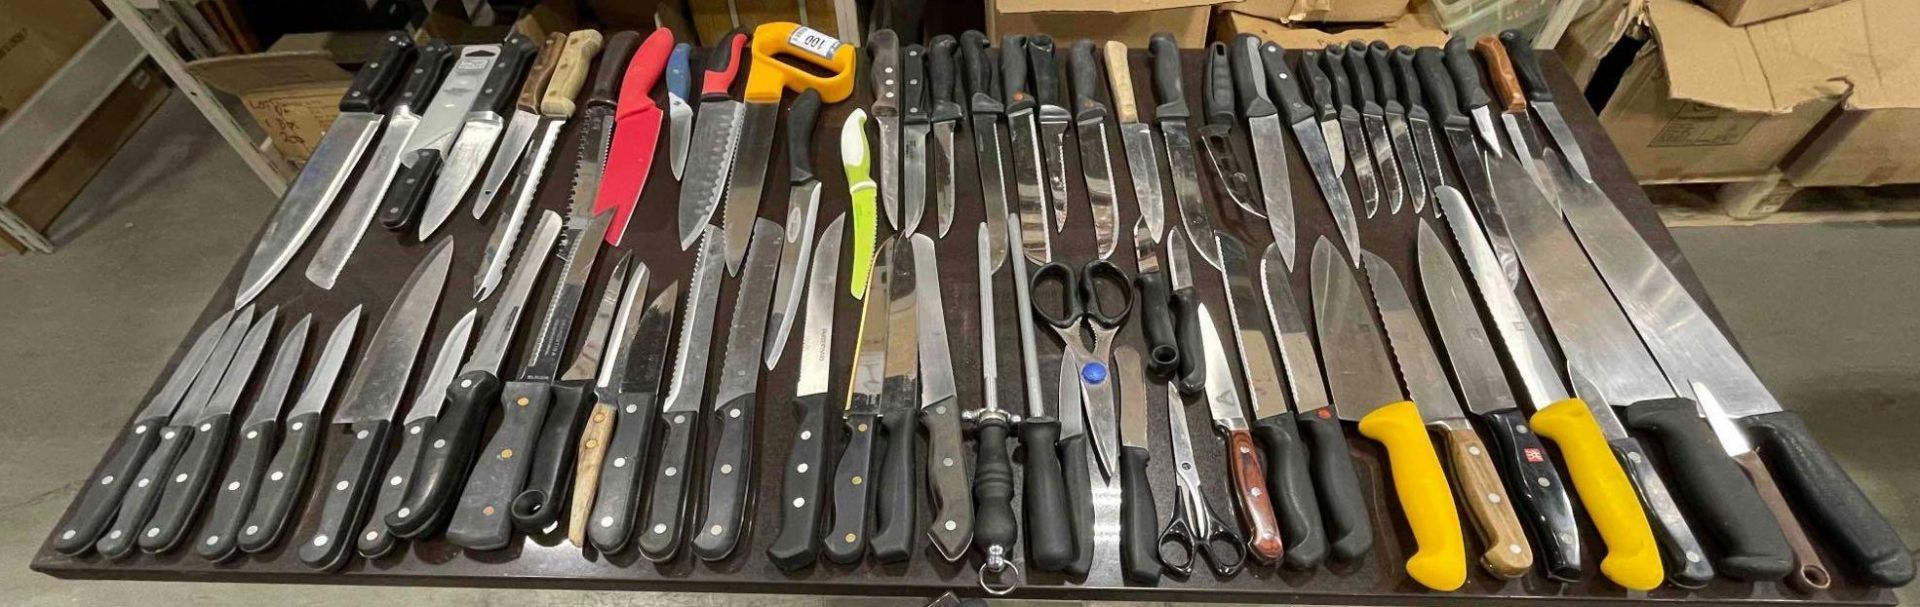 120 ASSORTED BUTCHER, BREAD, PARING, STEAK AND UTILITY KNIVES INCLUDING: - Image 4 of 4